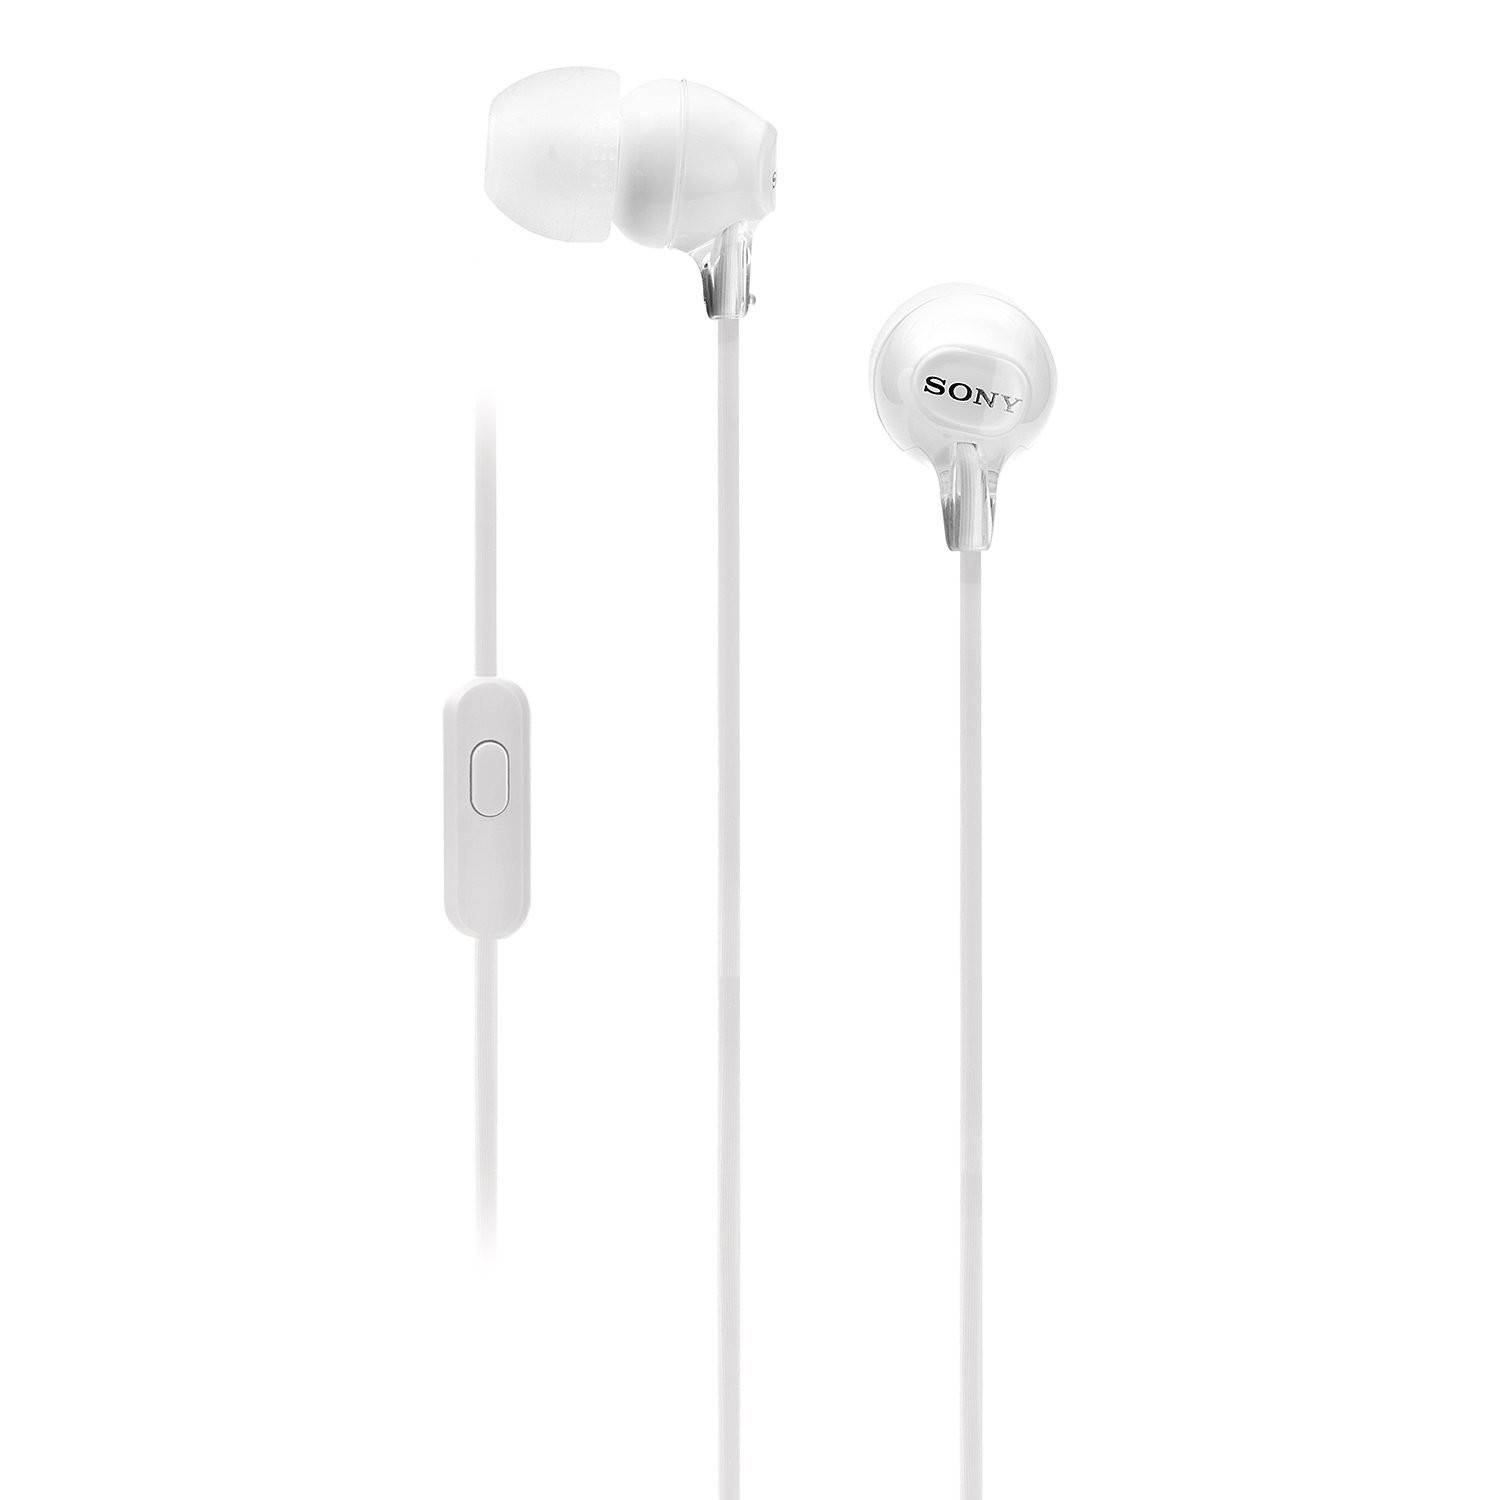 Sony MDR-EX15AP In-Ear Stereo Headphones with Mic, White` - Rs.770